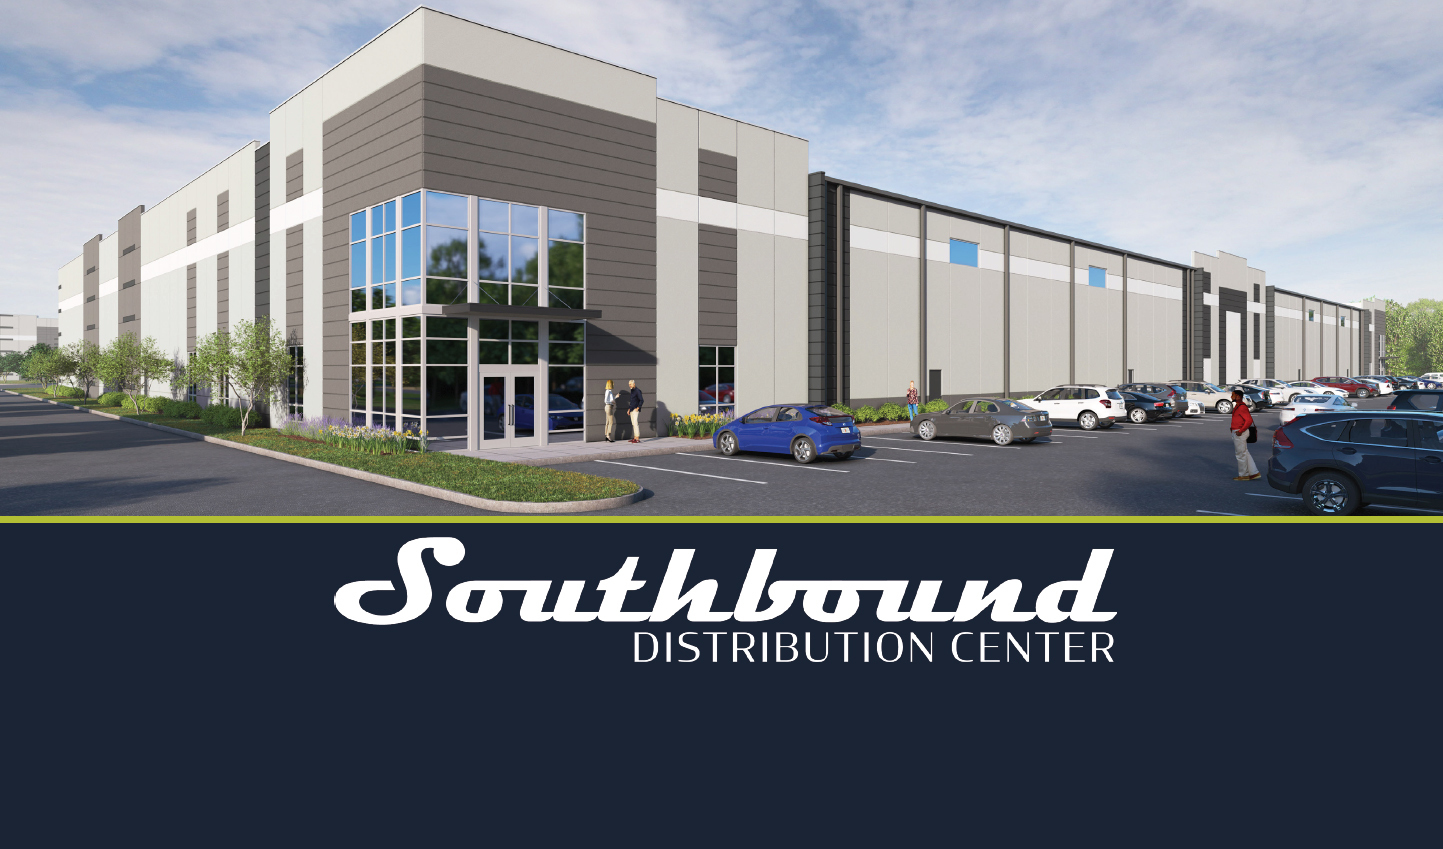 Southbound Distribution Center is at Powers Avenue east of St. Augustine Road.